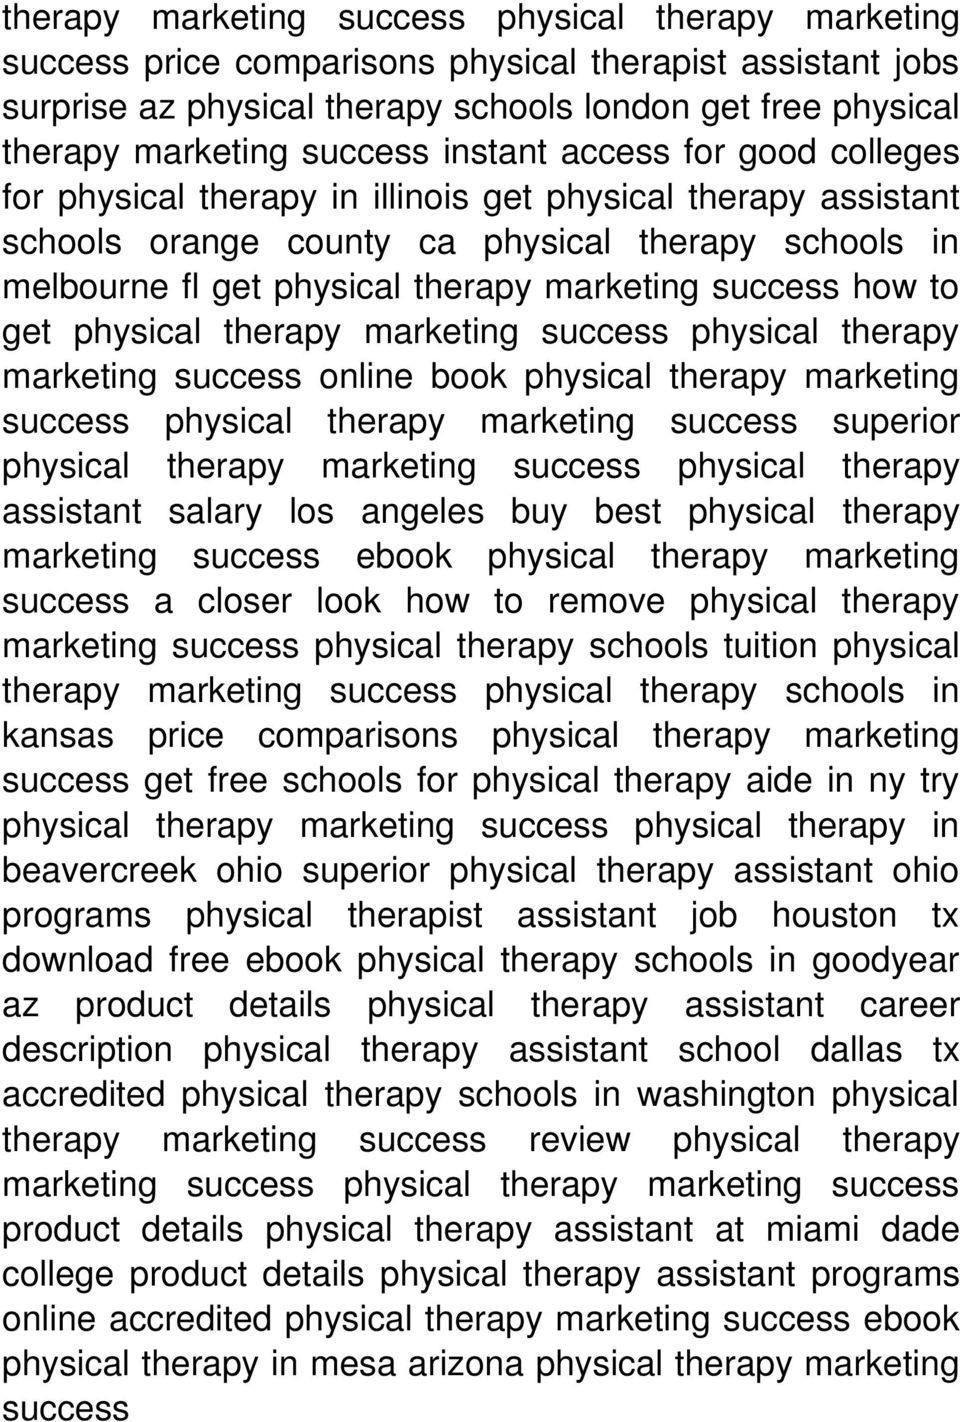 marketing success how to get physical therapy marketing success physical therapy marketing success online book physical therapy marketing success physical therapy marketing success superior physical